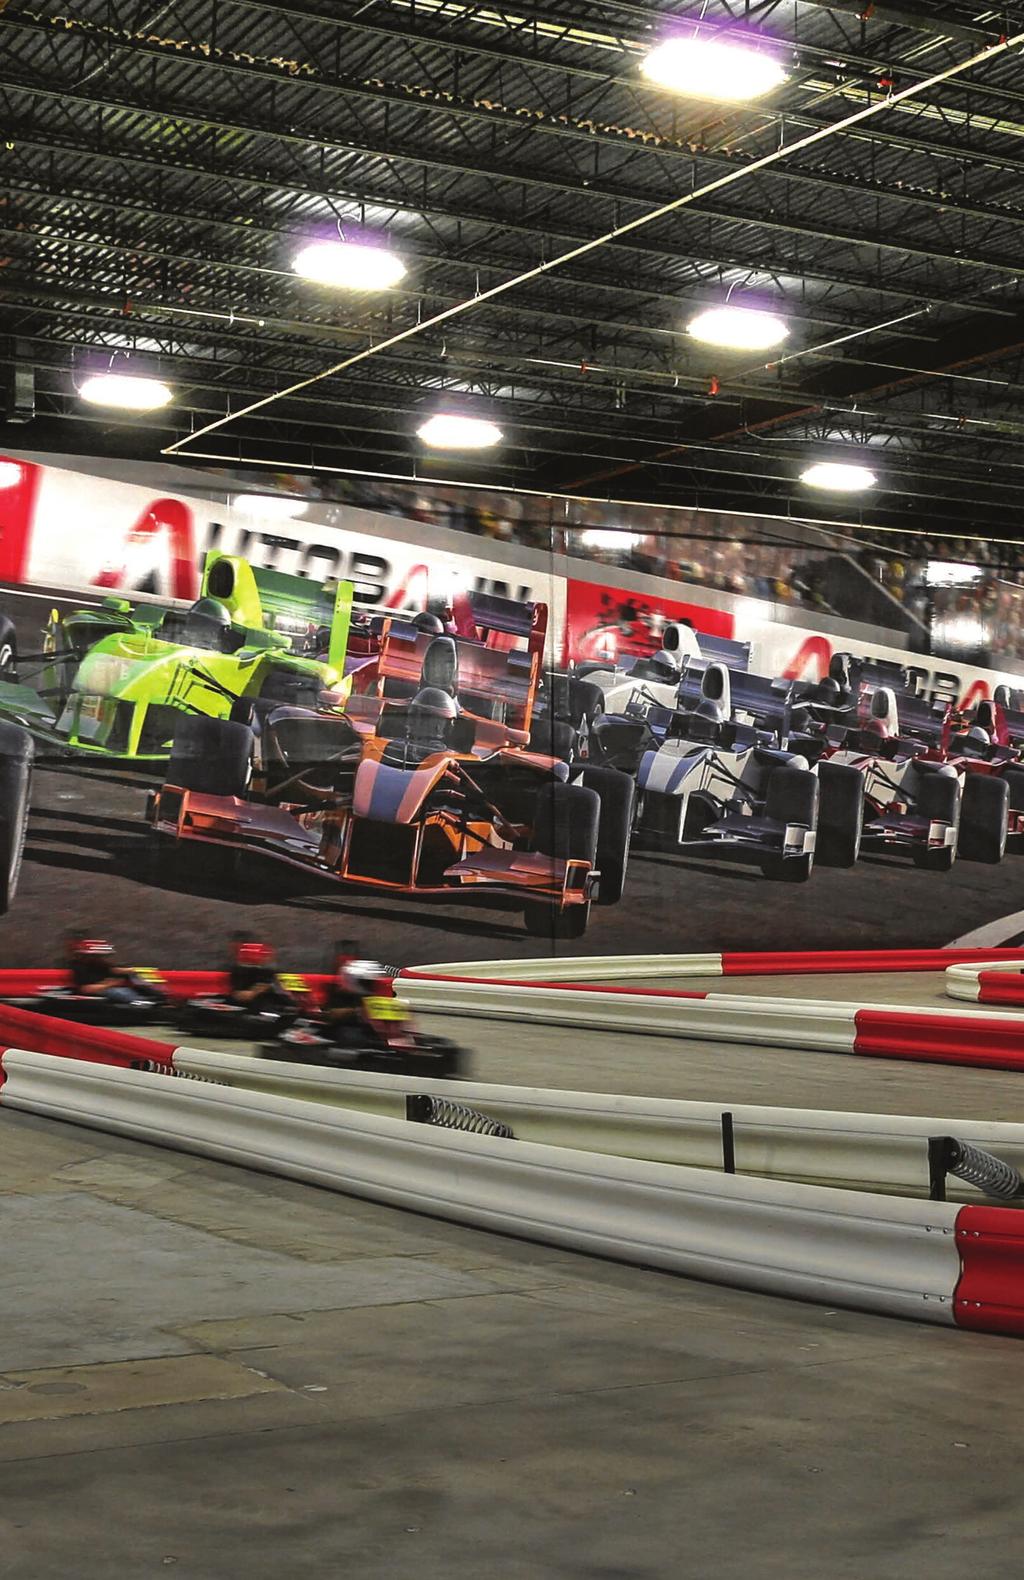 THE TRACK Professionally designed Grand Prix-style tracks Advanced safety reflexive barrier